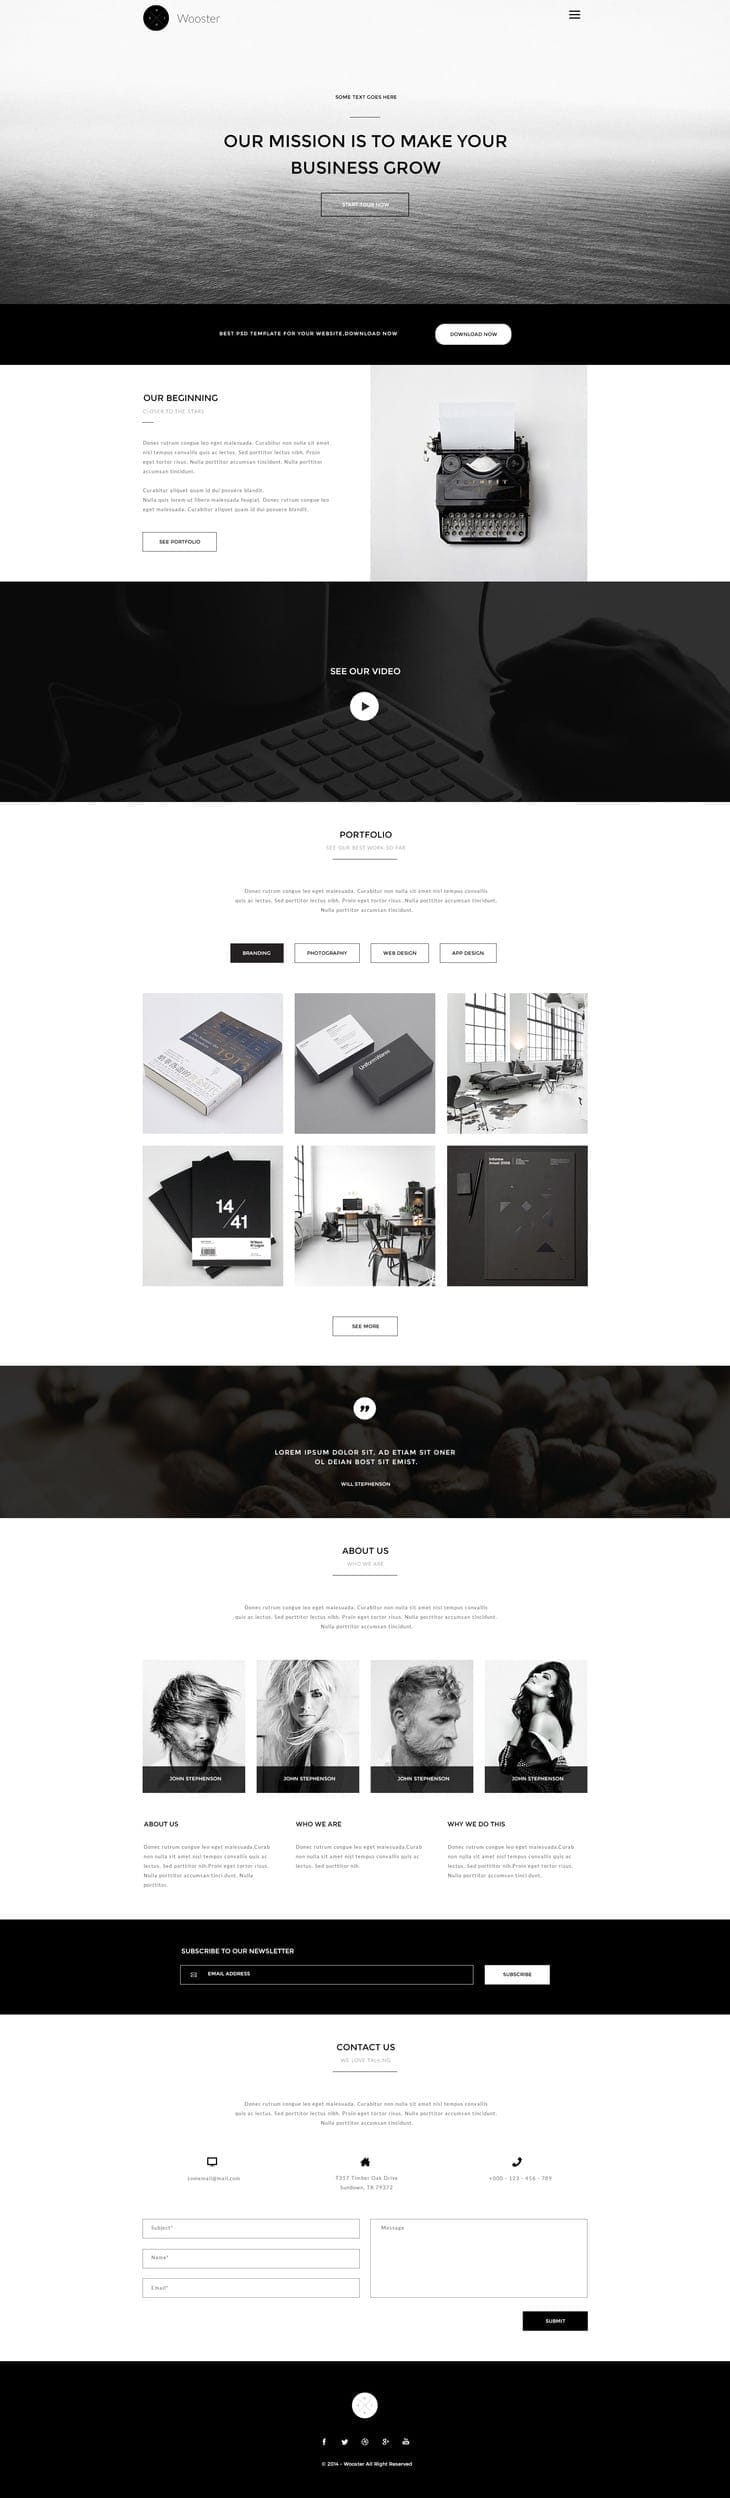 Wooster---Vintage Single Page Web Template PSD